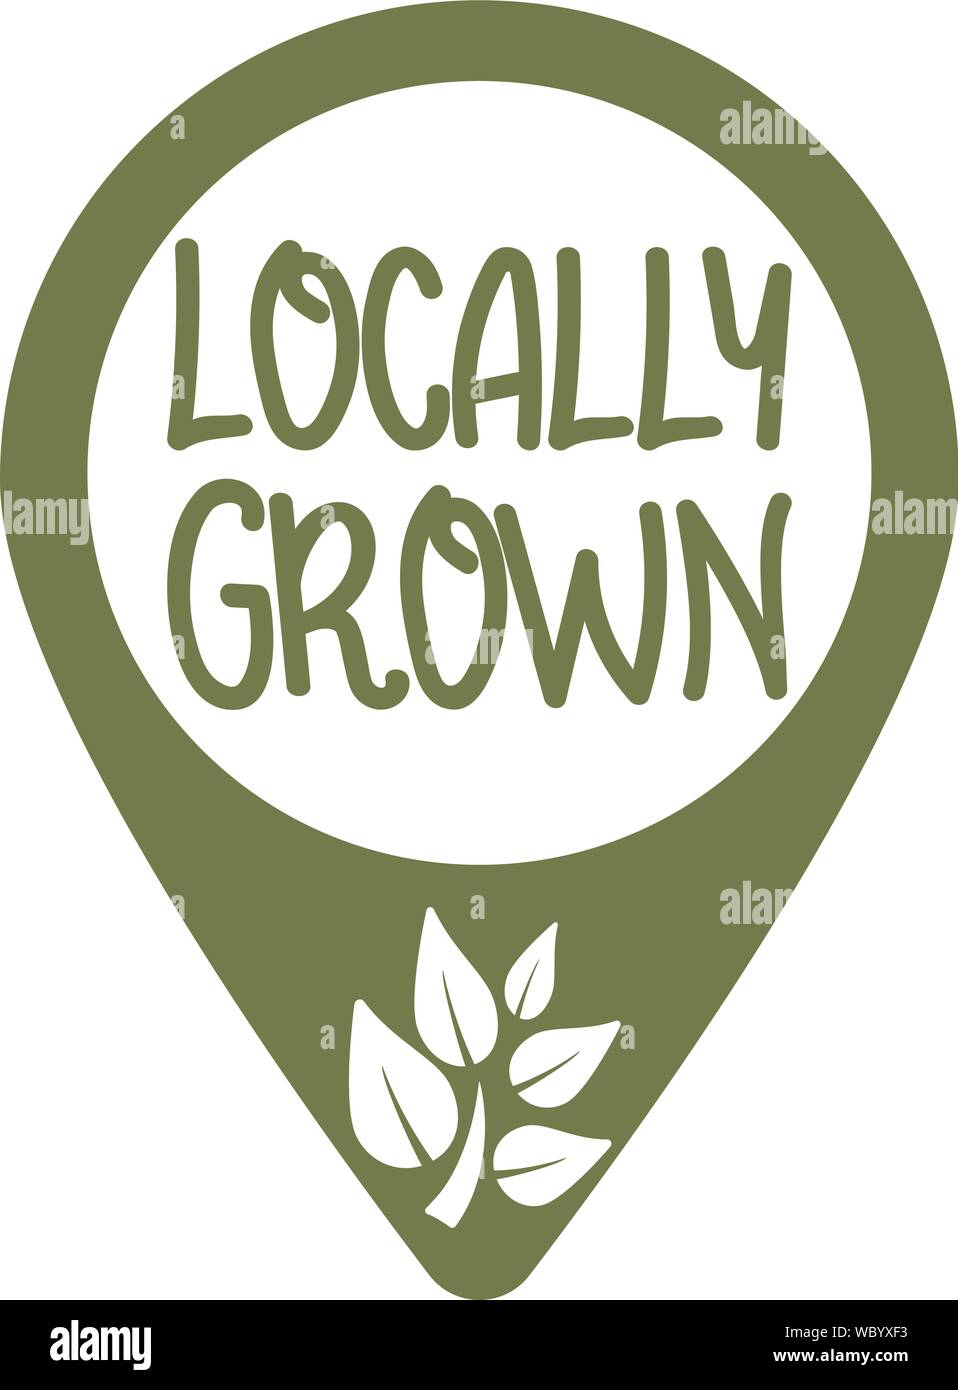 location marker with text LOCALLY GROWN and growing plant symbol vector illustration Stock Vector